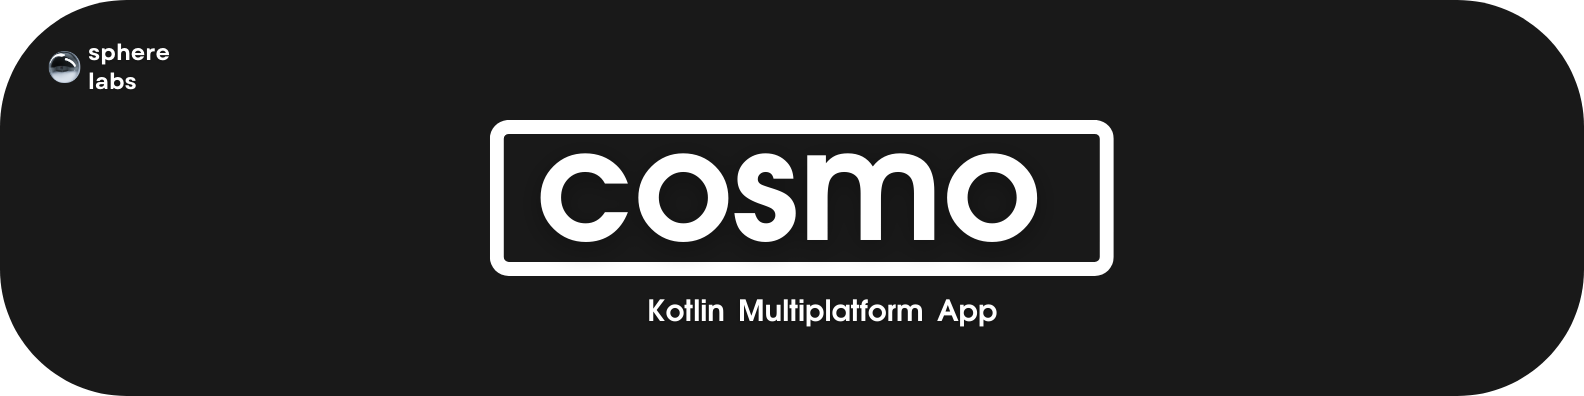 Cosmo Banner